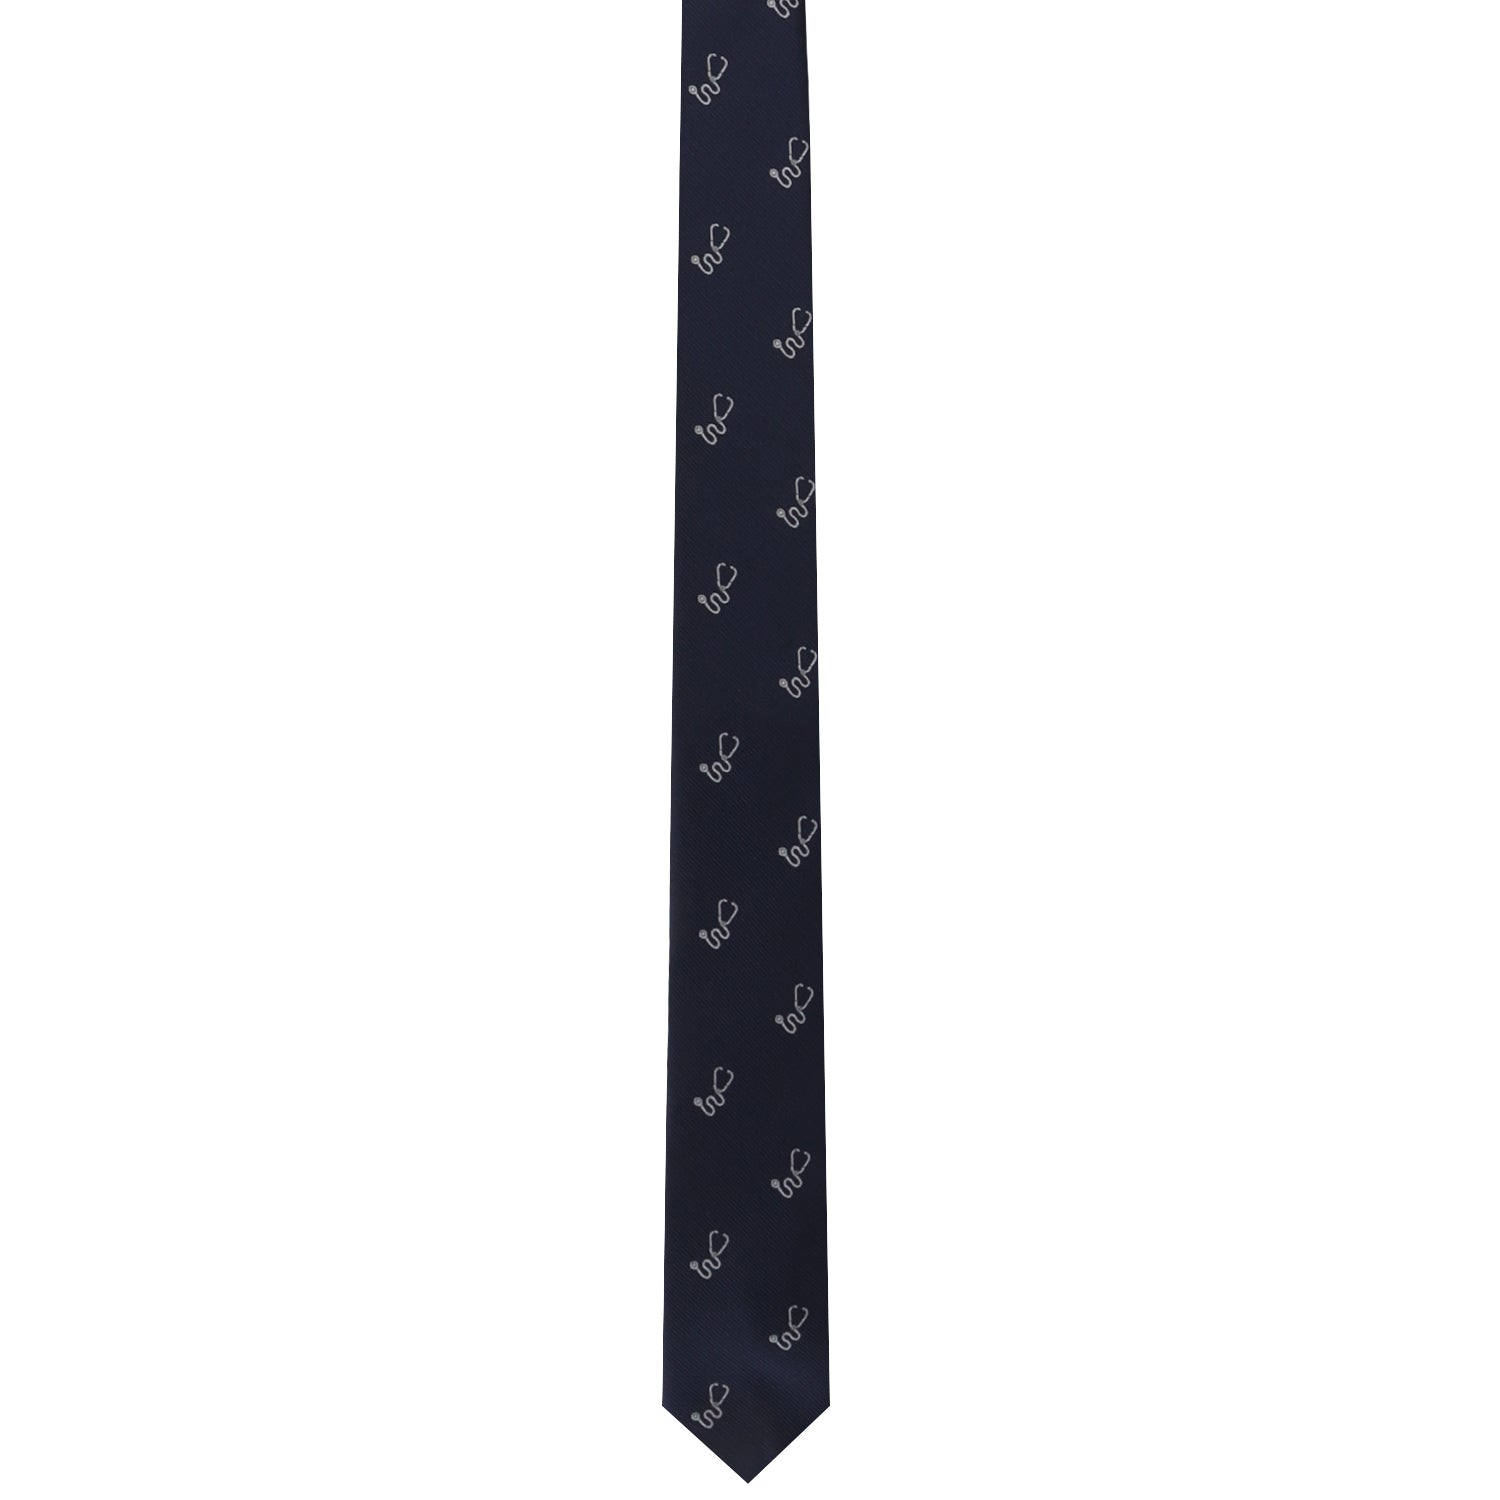 Wear an extraordinary Stethoscope Skinny Tie with an anchor on it.